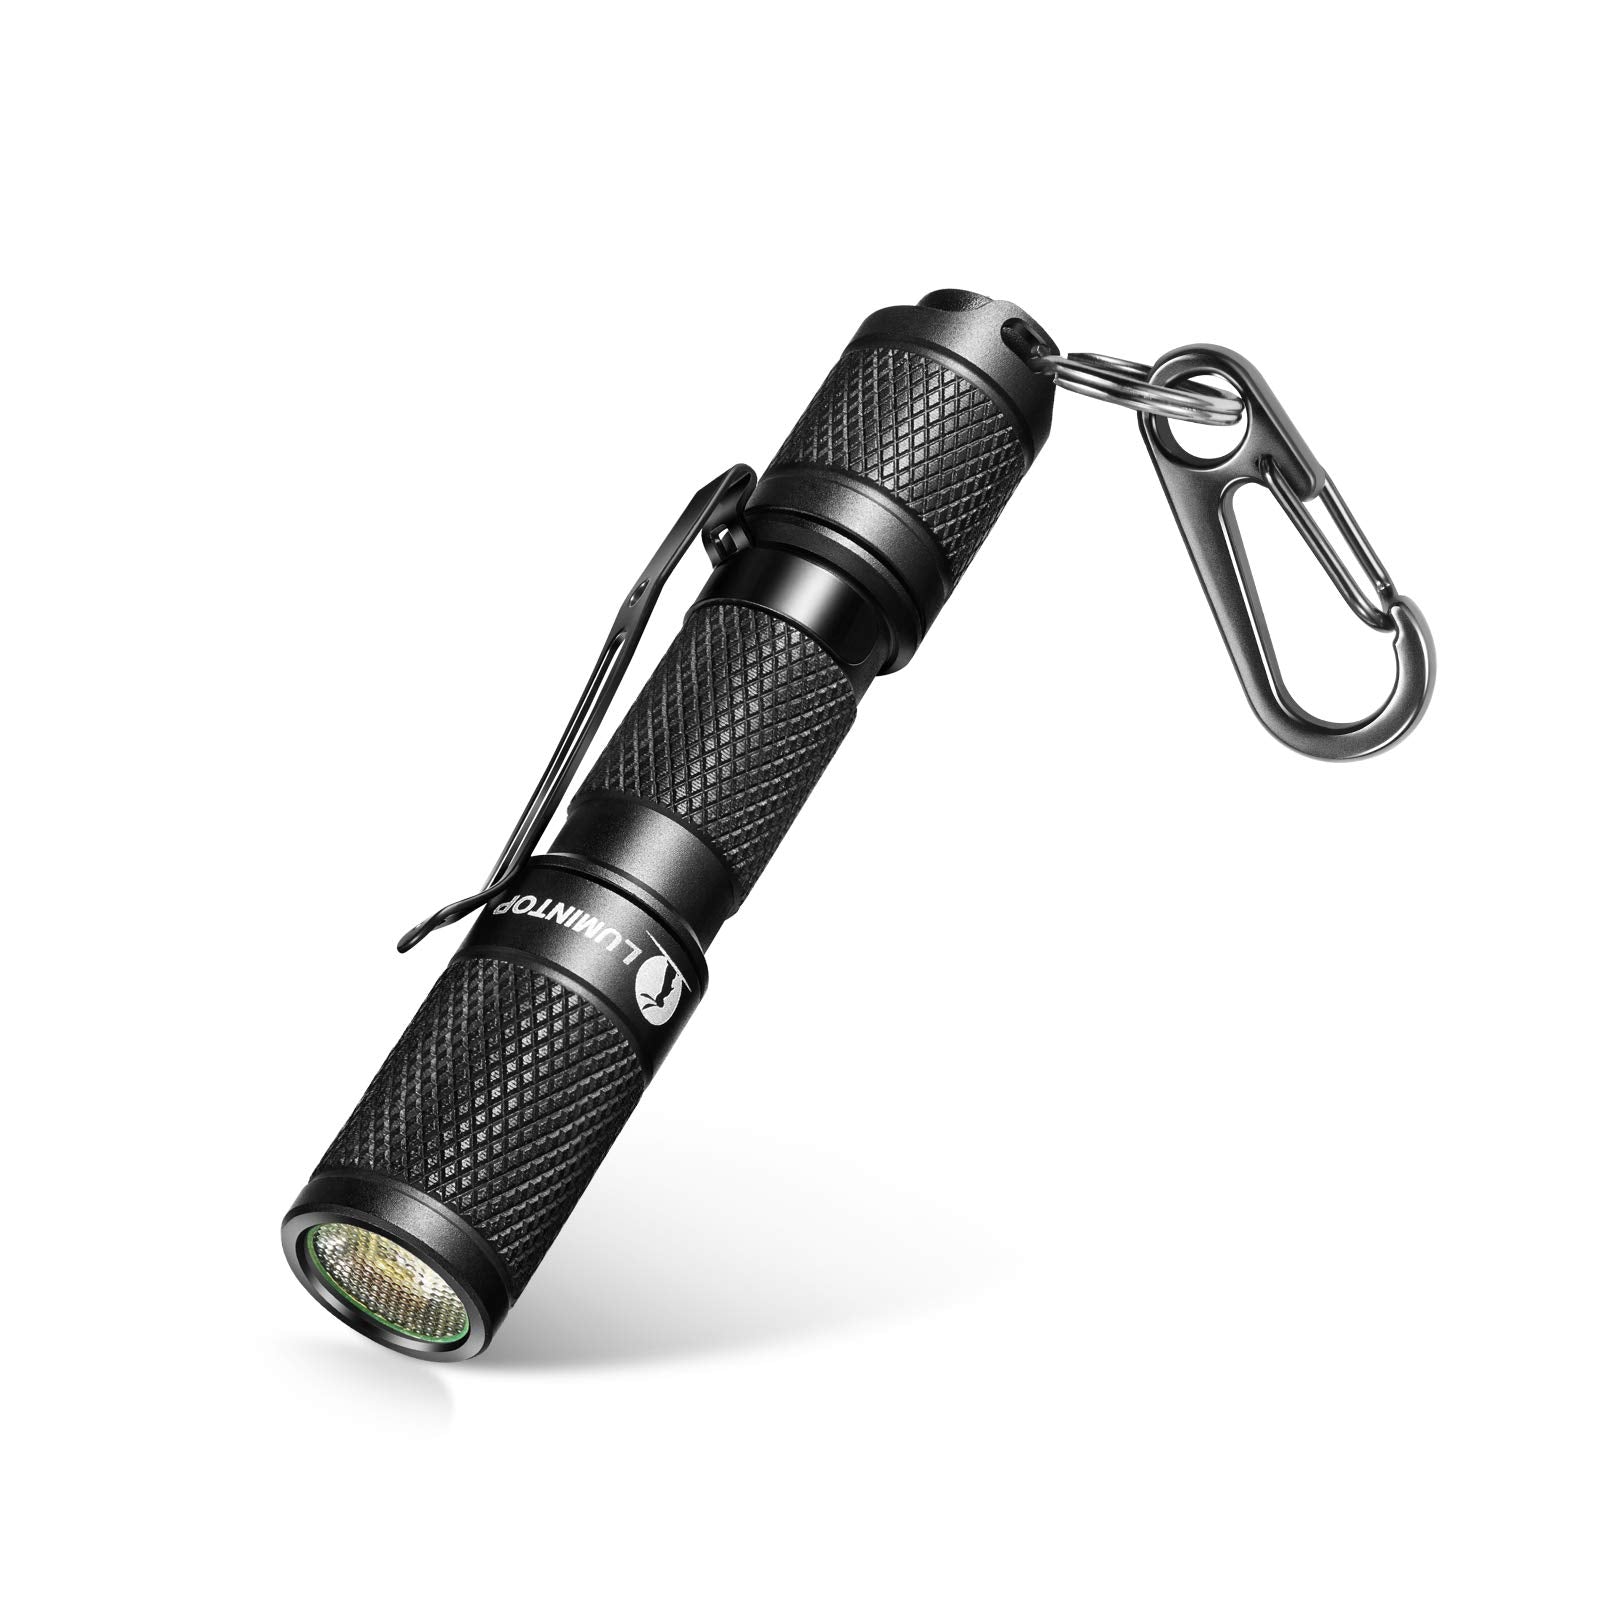 LUMINTOP Tool AAA LED Torch, Keyring Torch Super Bright with 110LM OSRAM LED, 3 Modes, IP68 Waterproof, Best for Camping, Hiking, Hunting, Backpacking, Fishing and EDC